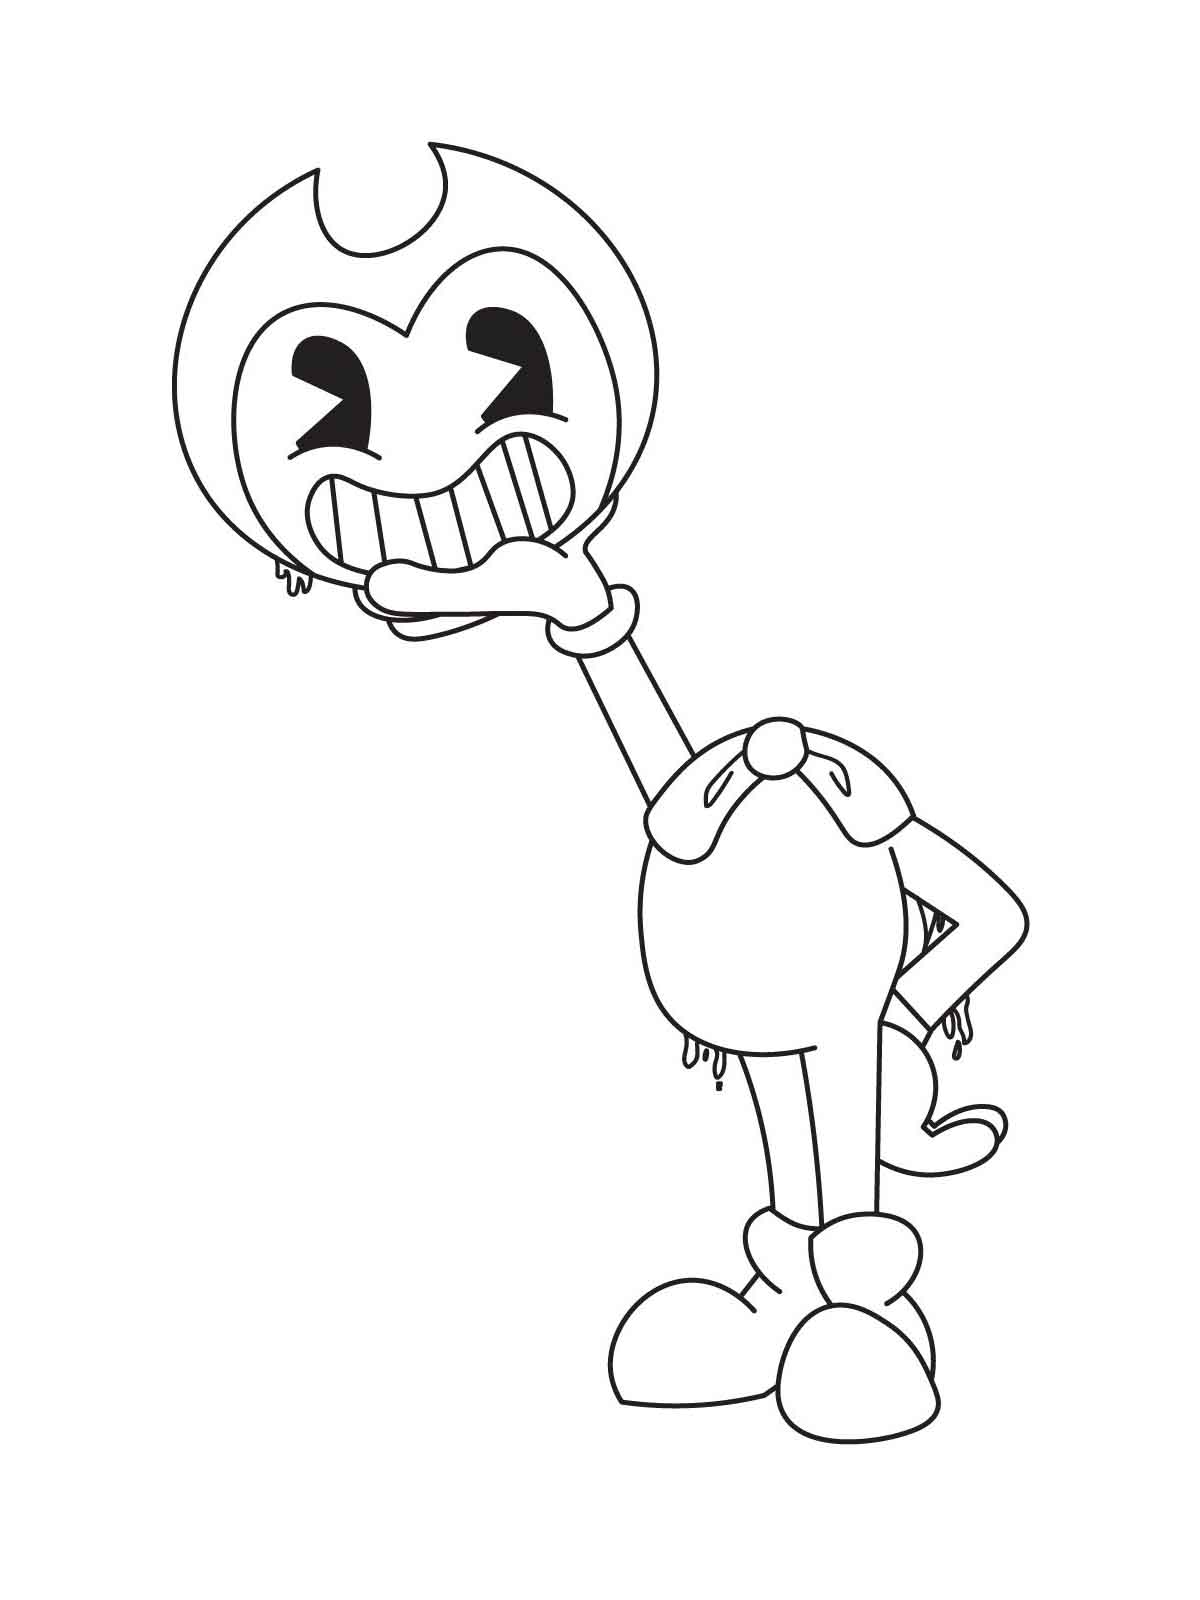 Bendy and the ink machine coloring pages